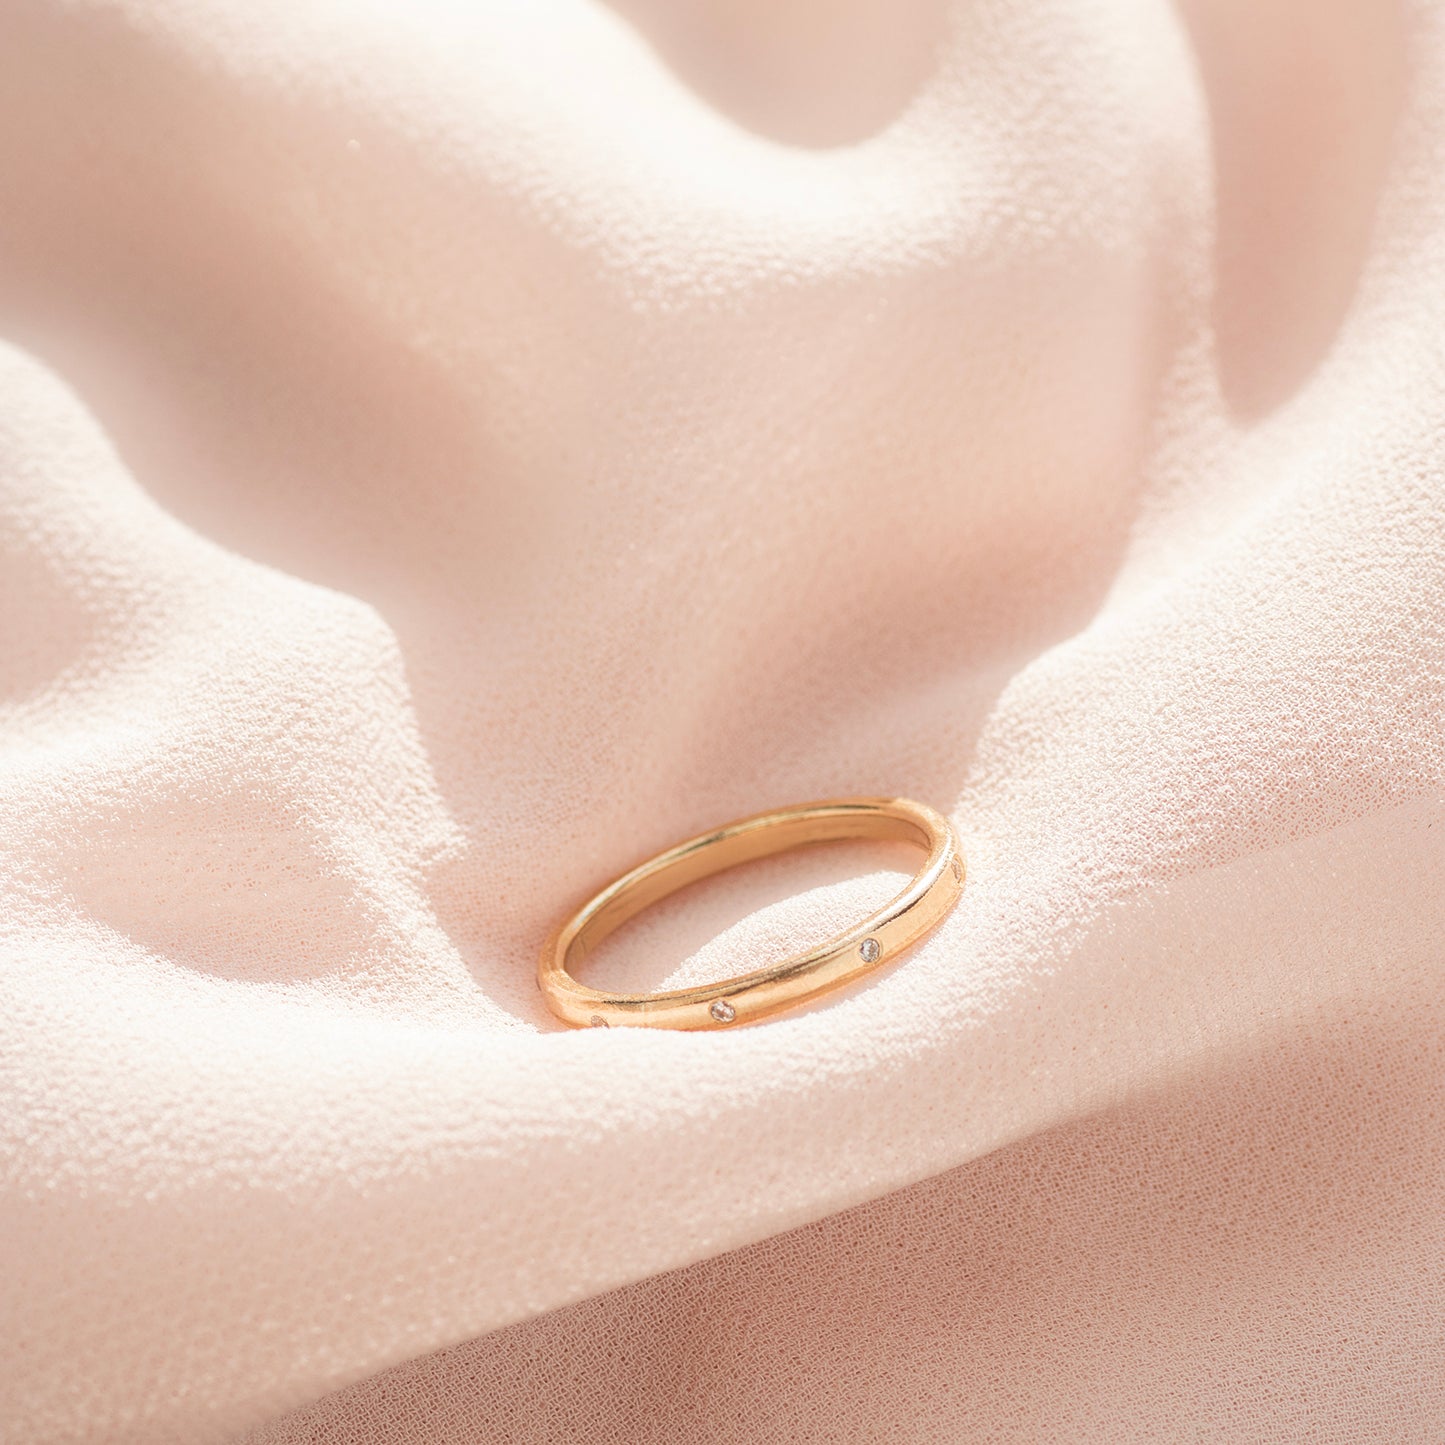 9kt Gold 10th Anniversary Ring - 10 Diamonds for 10 Years of Love